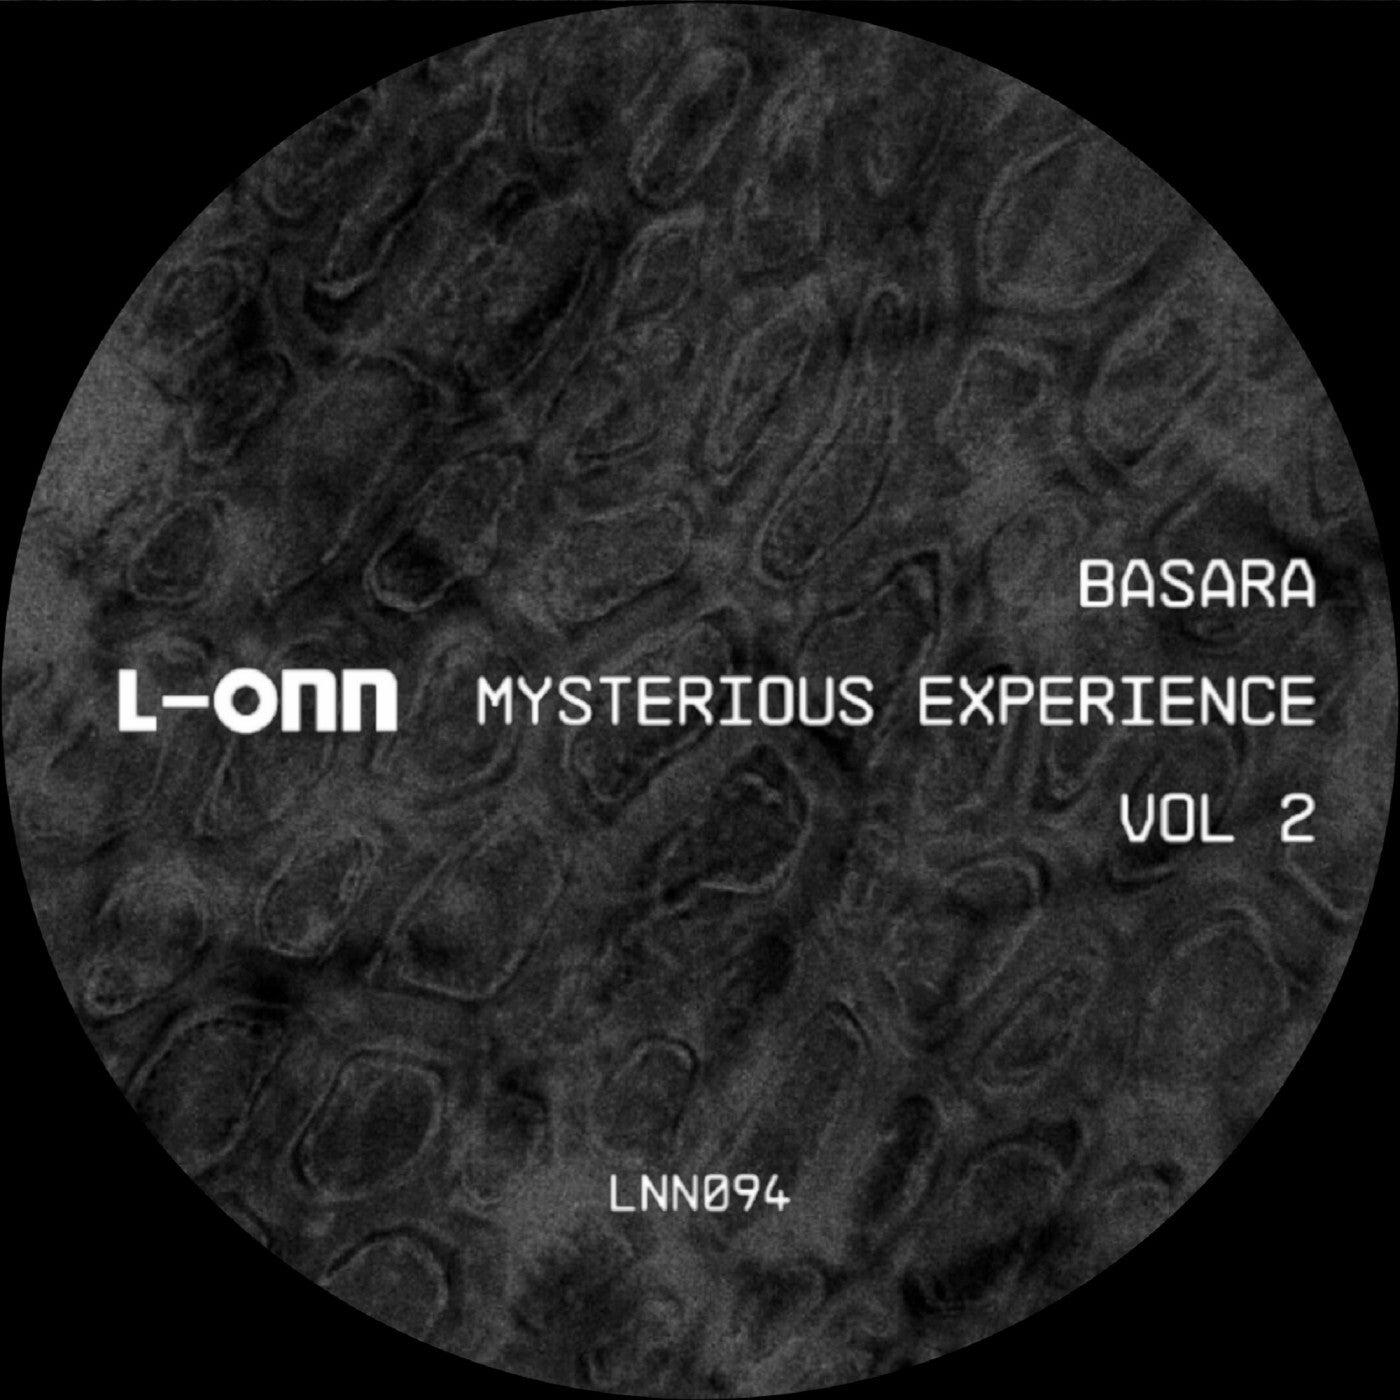 Mysterious Experience Vol.2